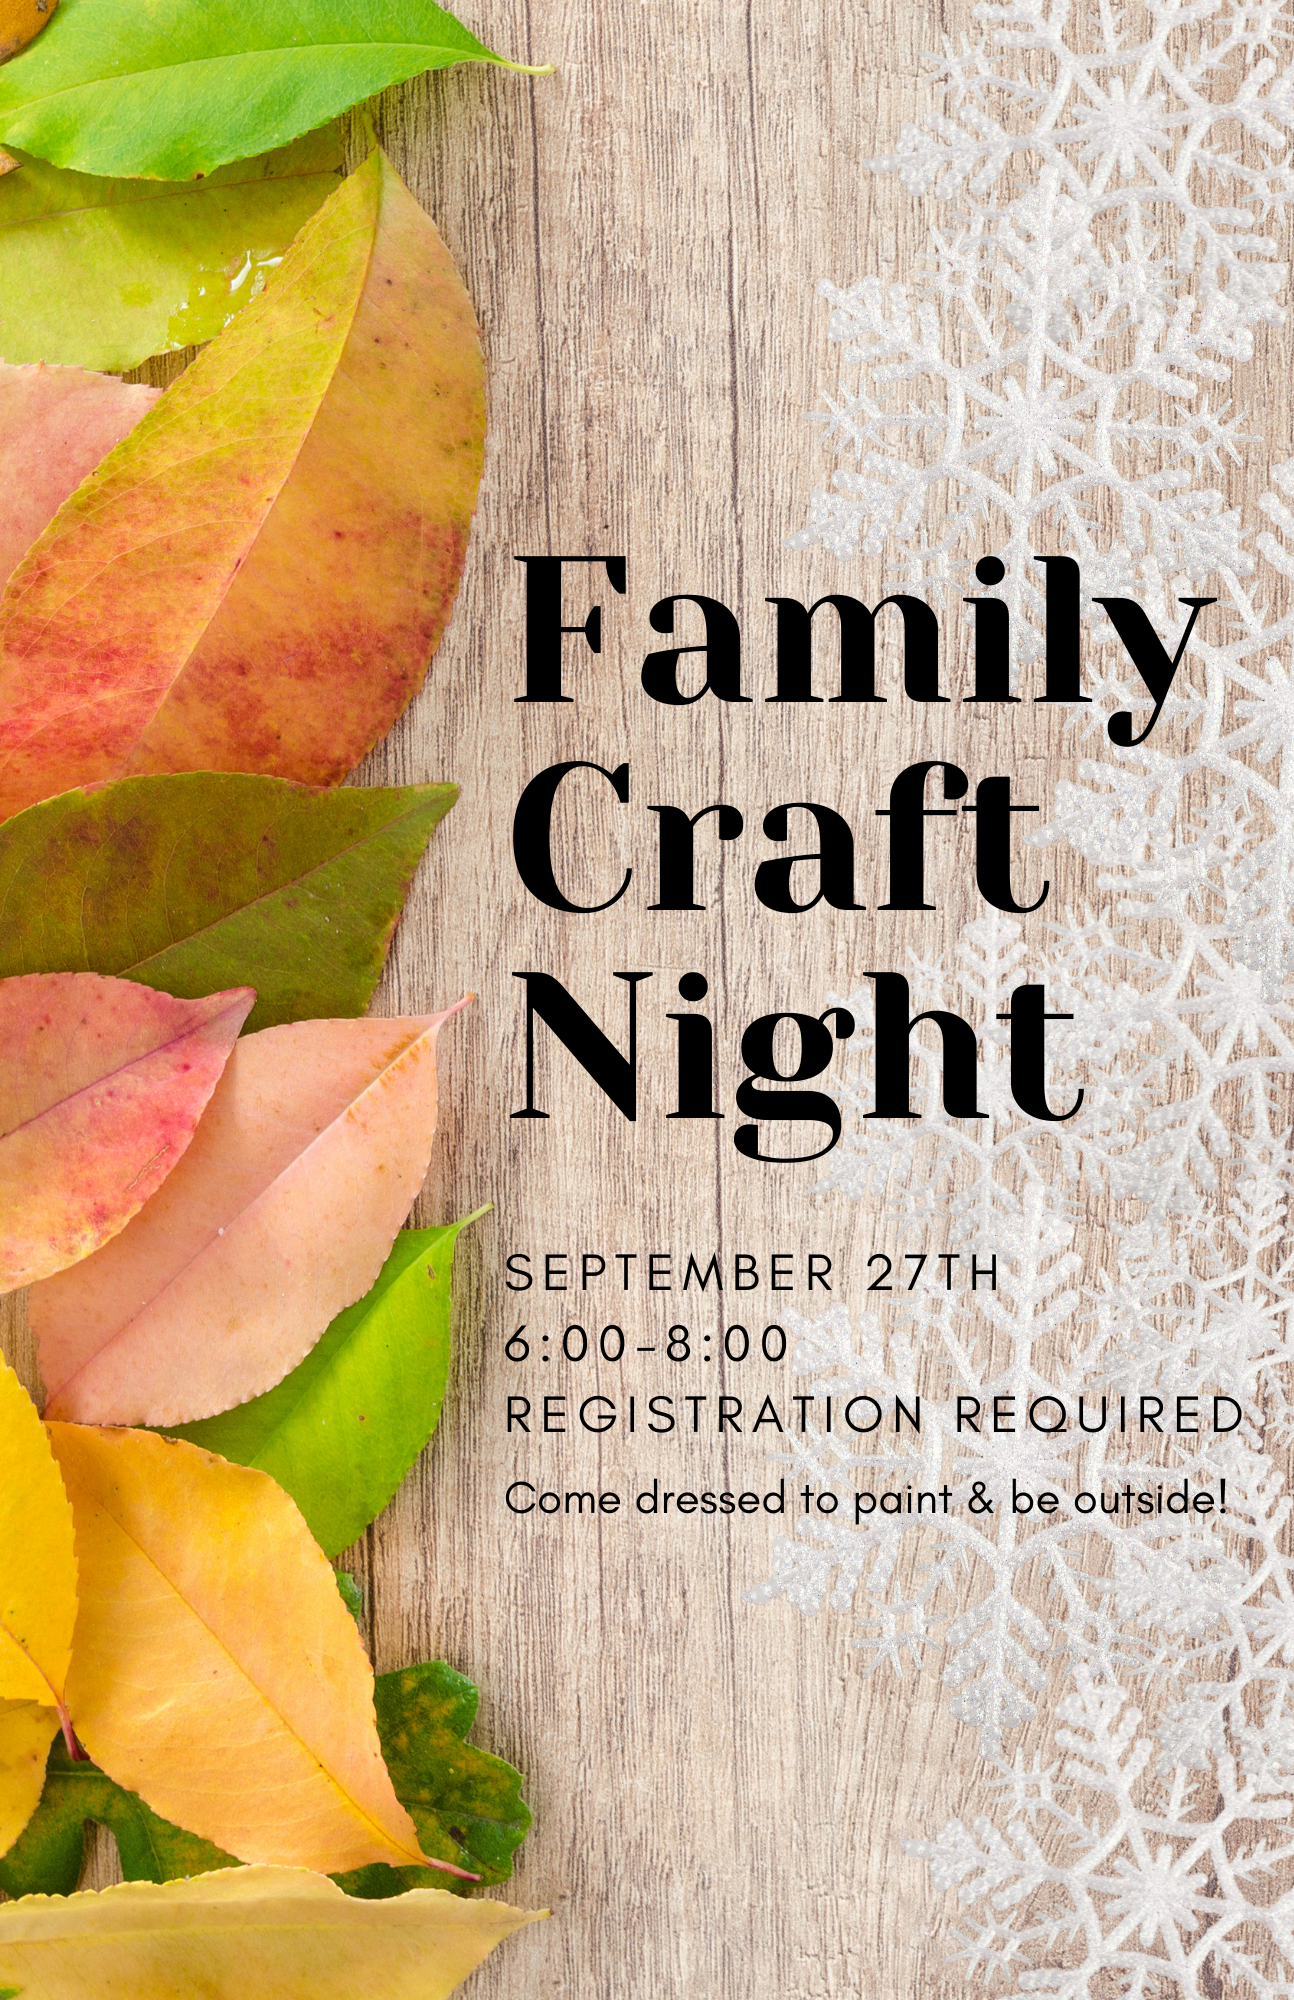 wood background with fall leaves along side of image.  Text:  Family Craft Night; September, 27; 6:00-8:00; Dress to paint and go outside.